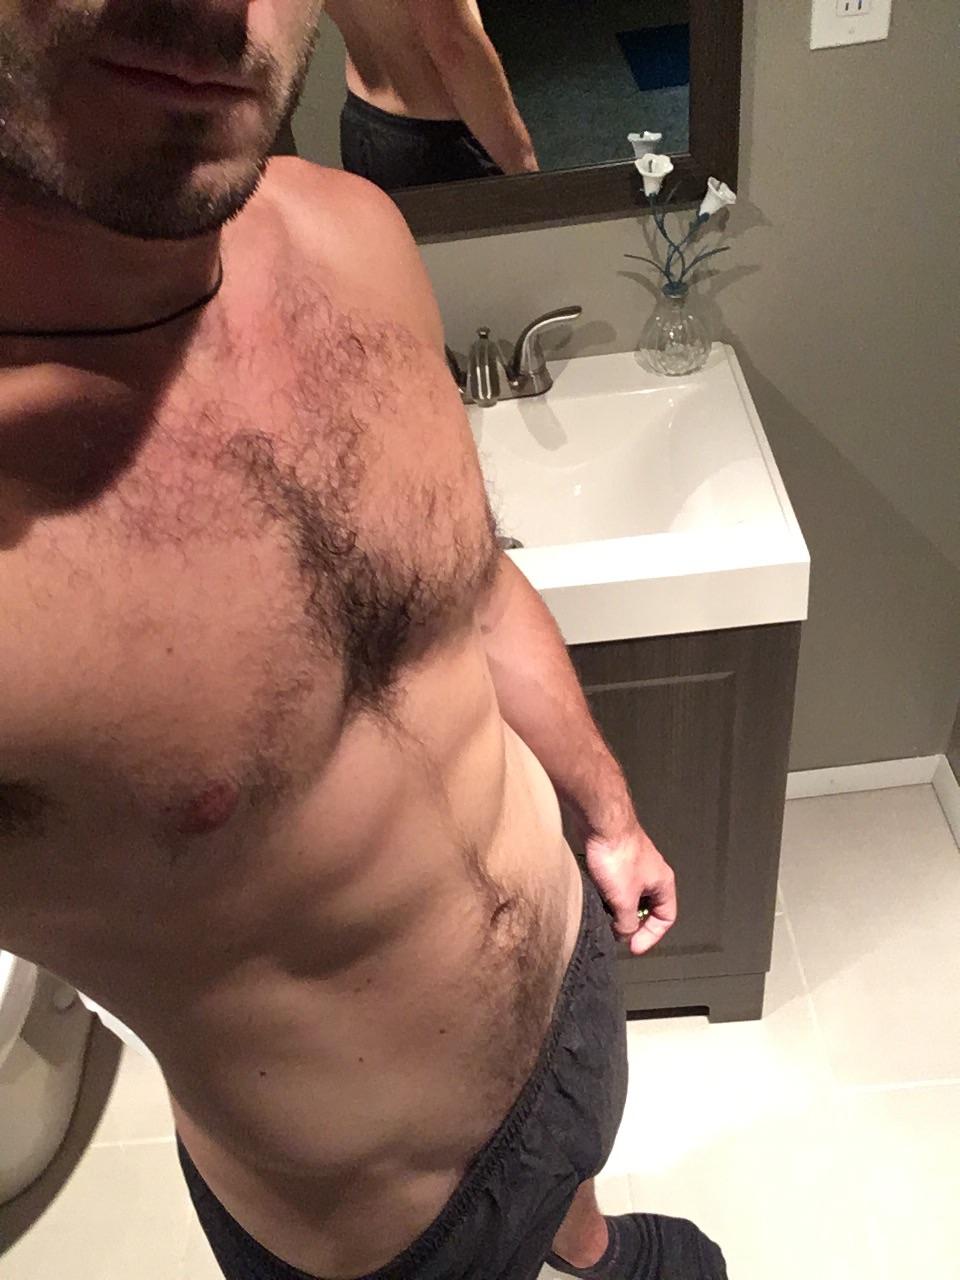 Gonna get soaked in the summer heat. What's the chance you want [M]ore?